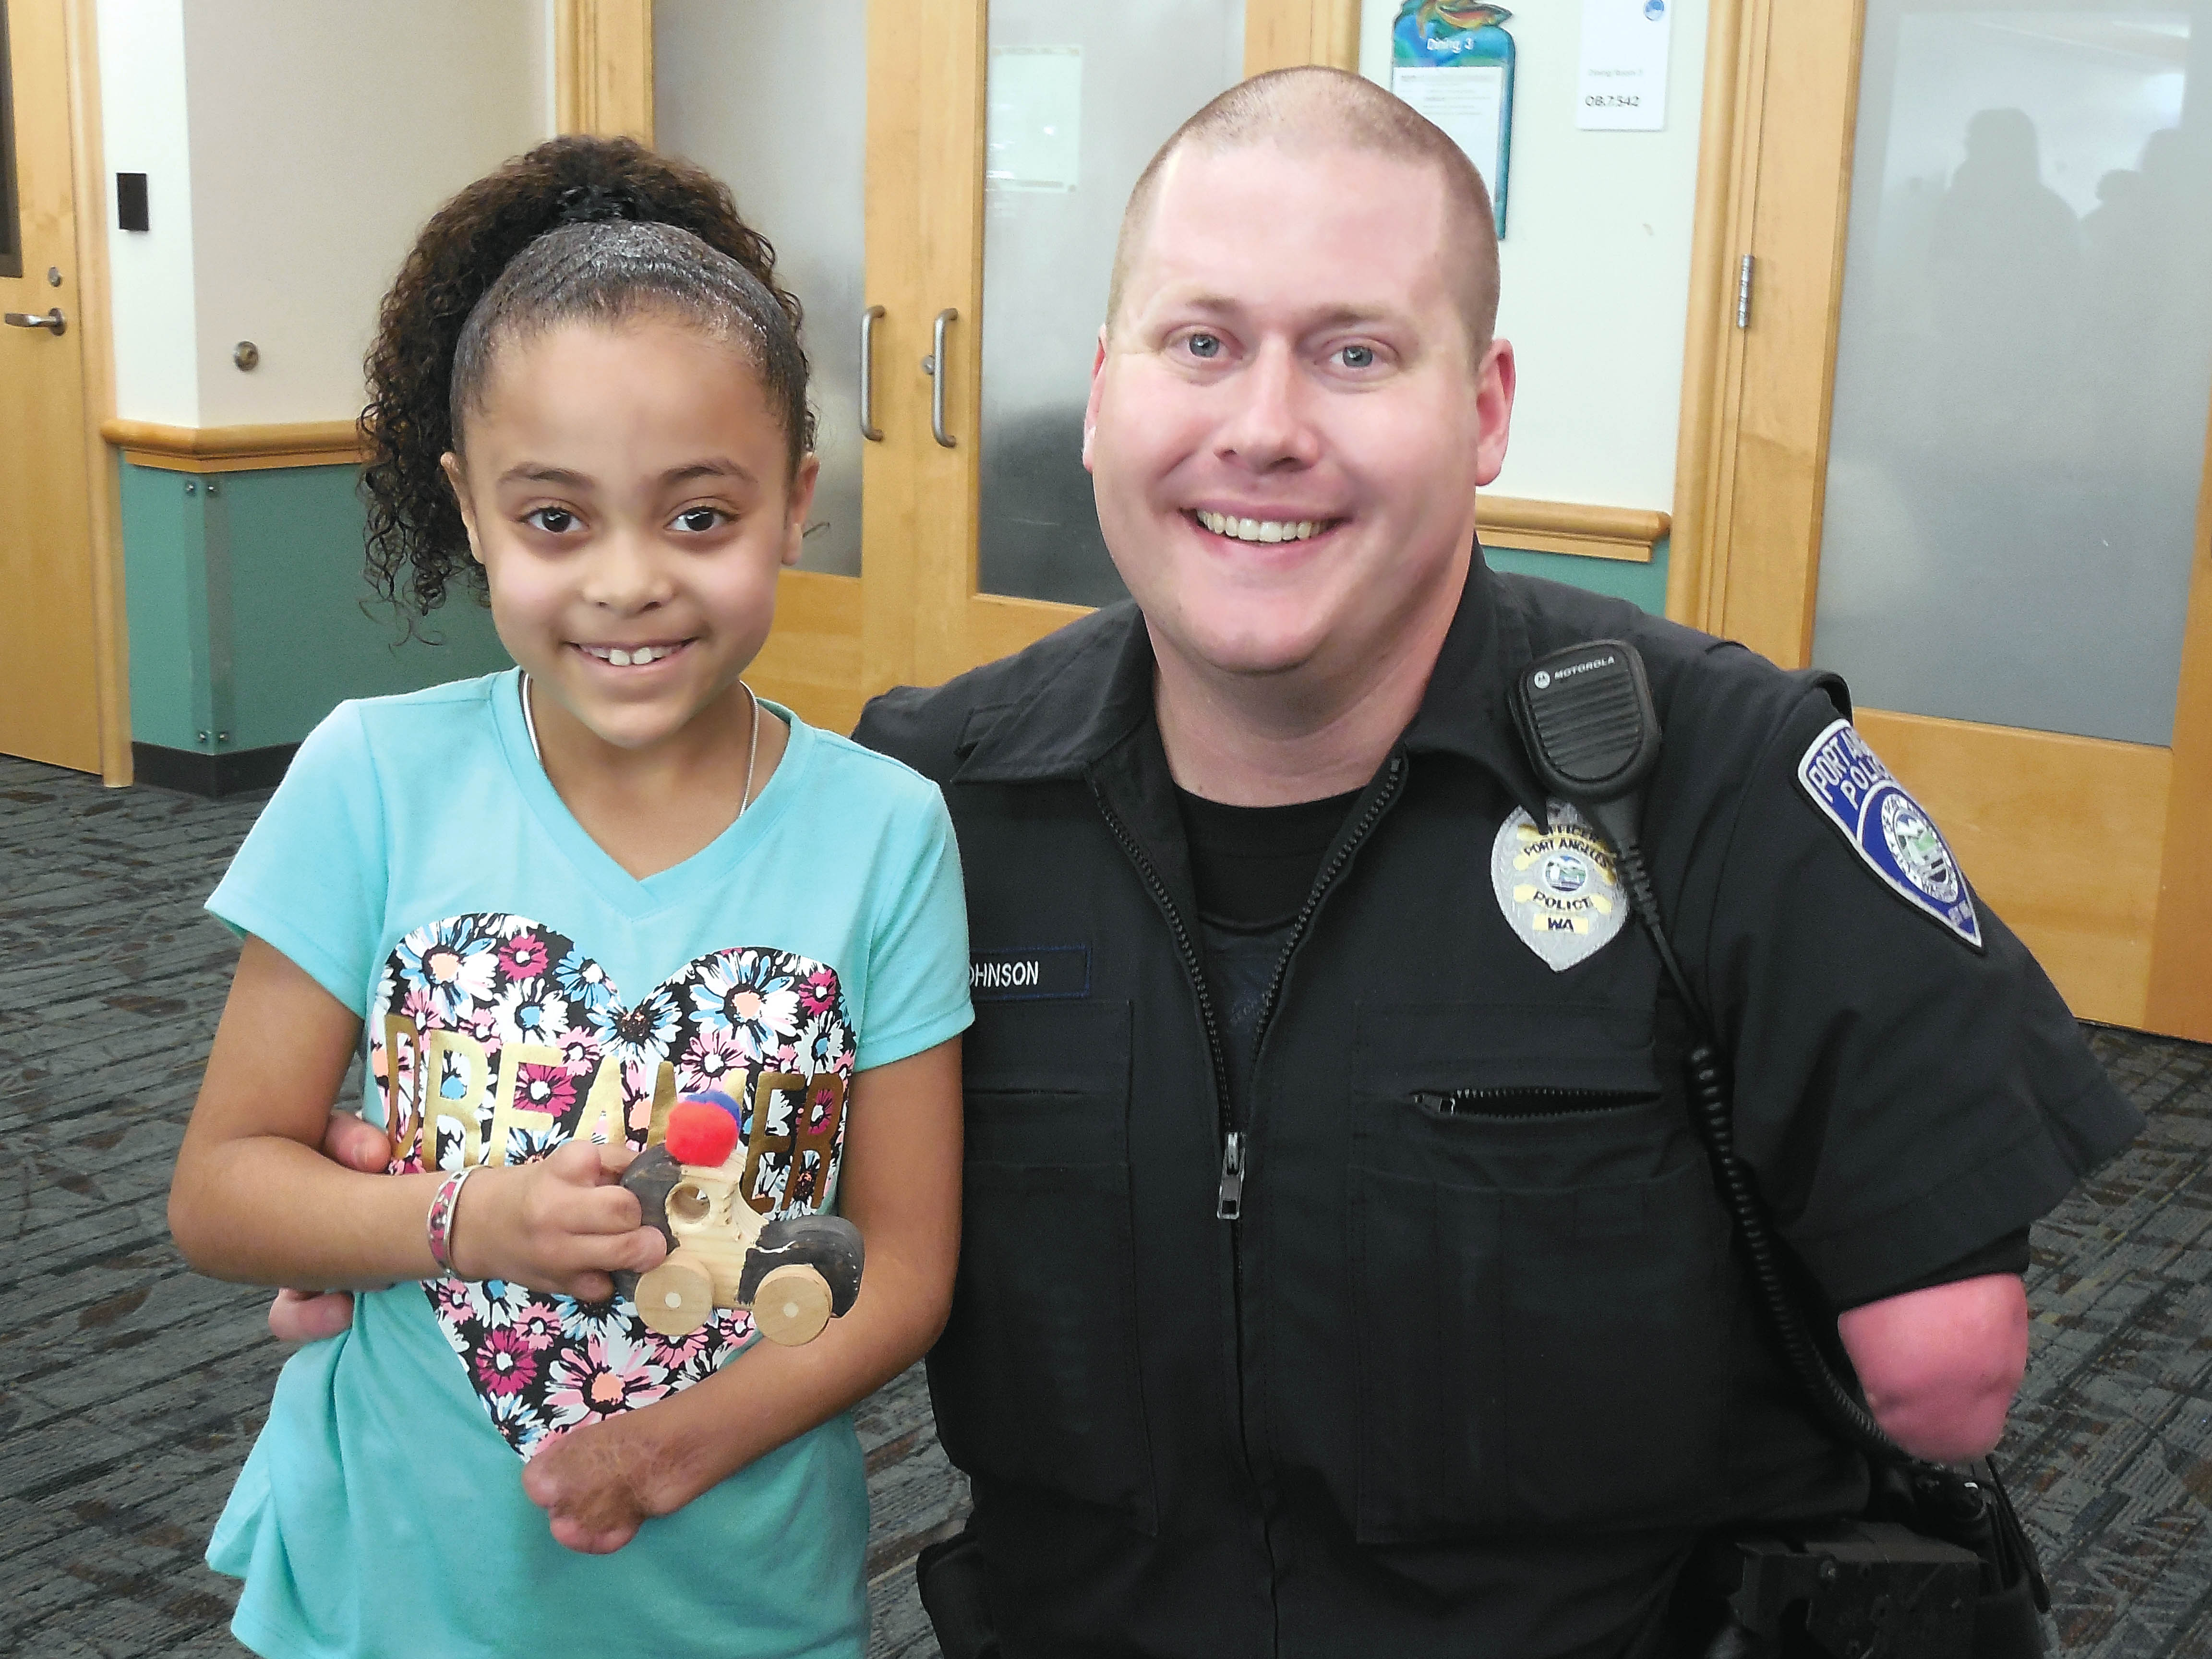 Officer Mike Johnson and Ariahna Gregory share a happy moment at Seattle Children’s Hospital. ()